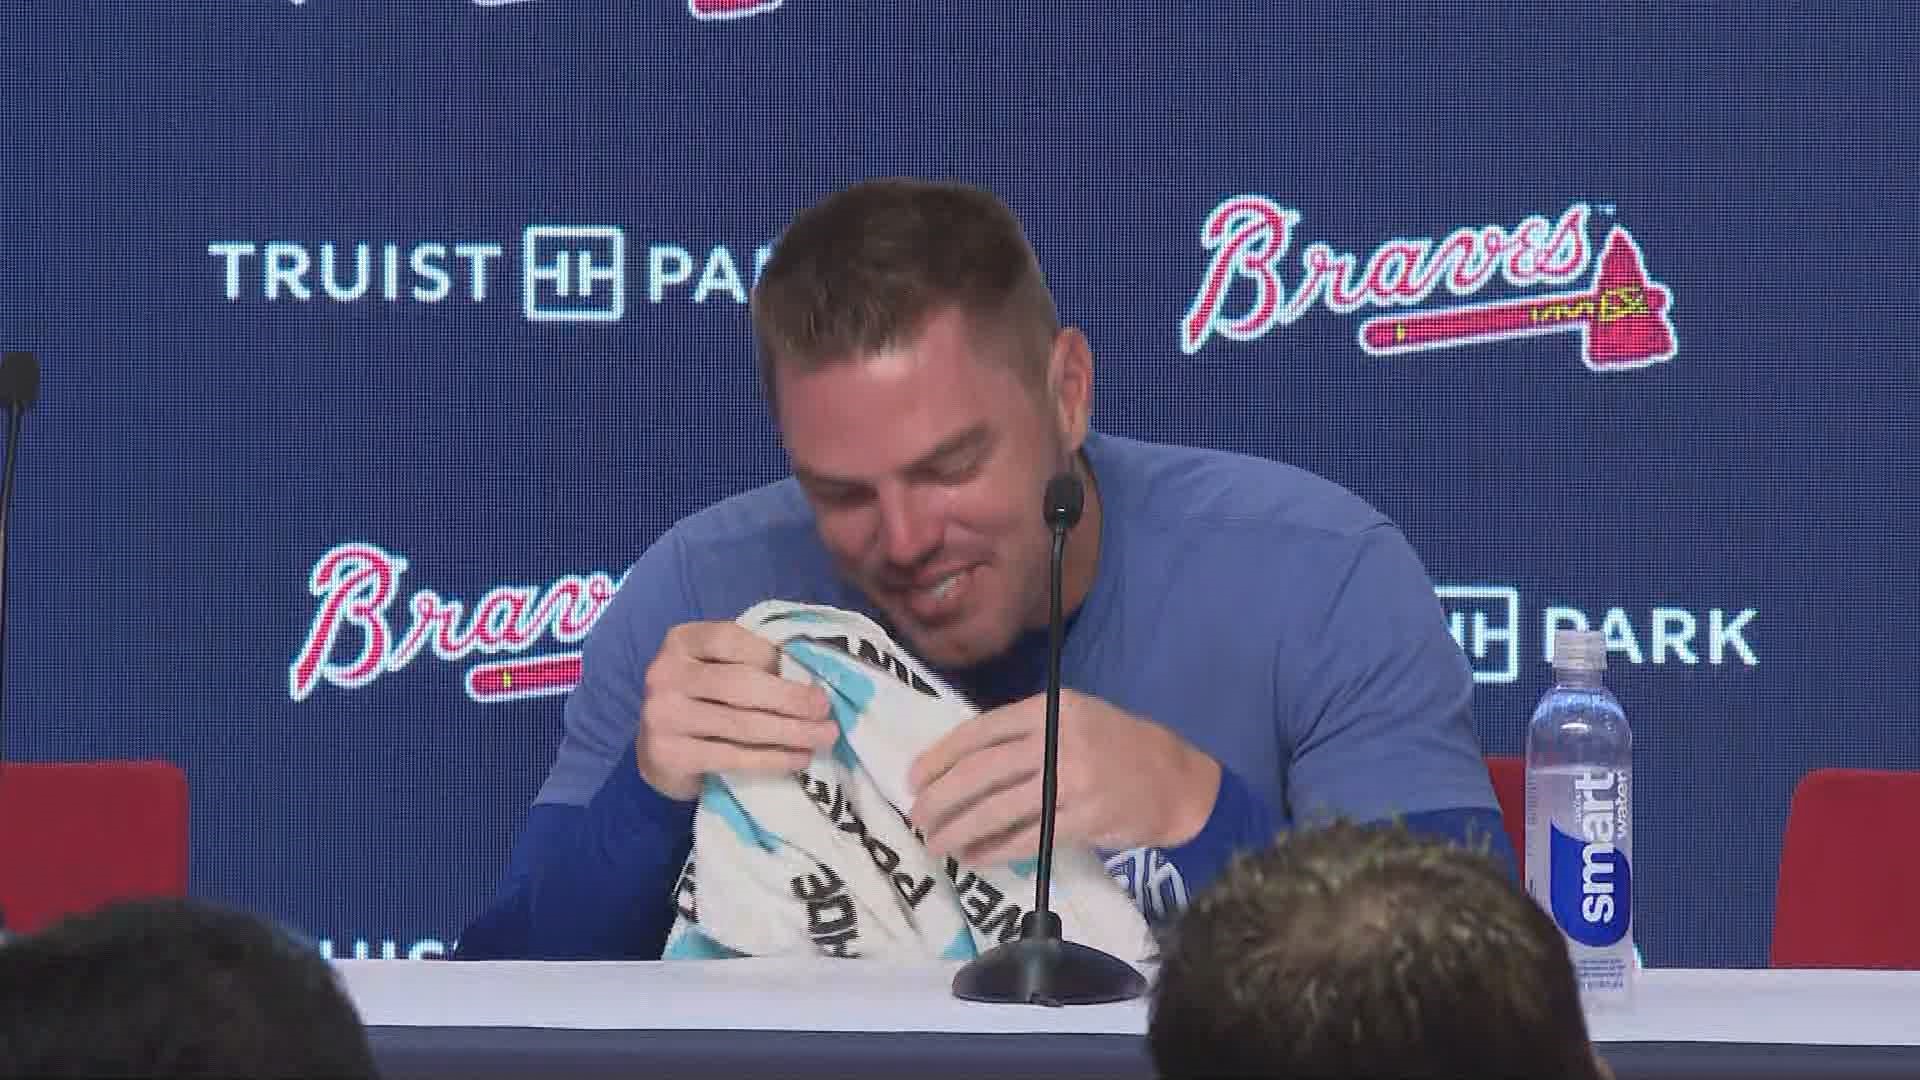 Freeman, who now plays for the Dodgers, got emotional Friday during a news conference. The Former Braves player is set to take on his old teammates.